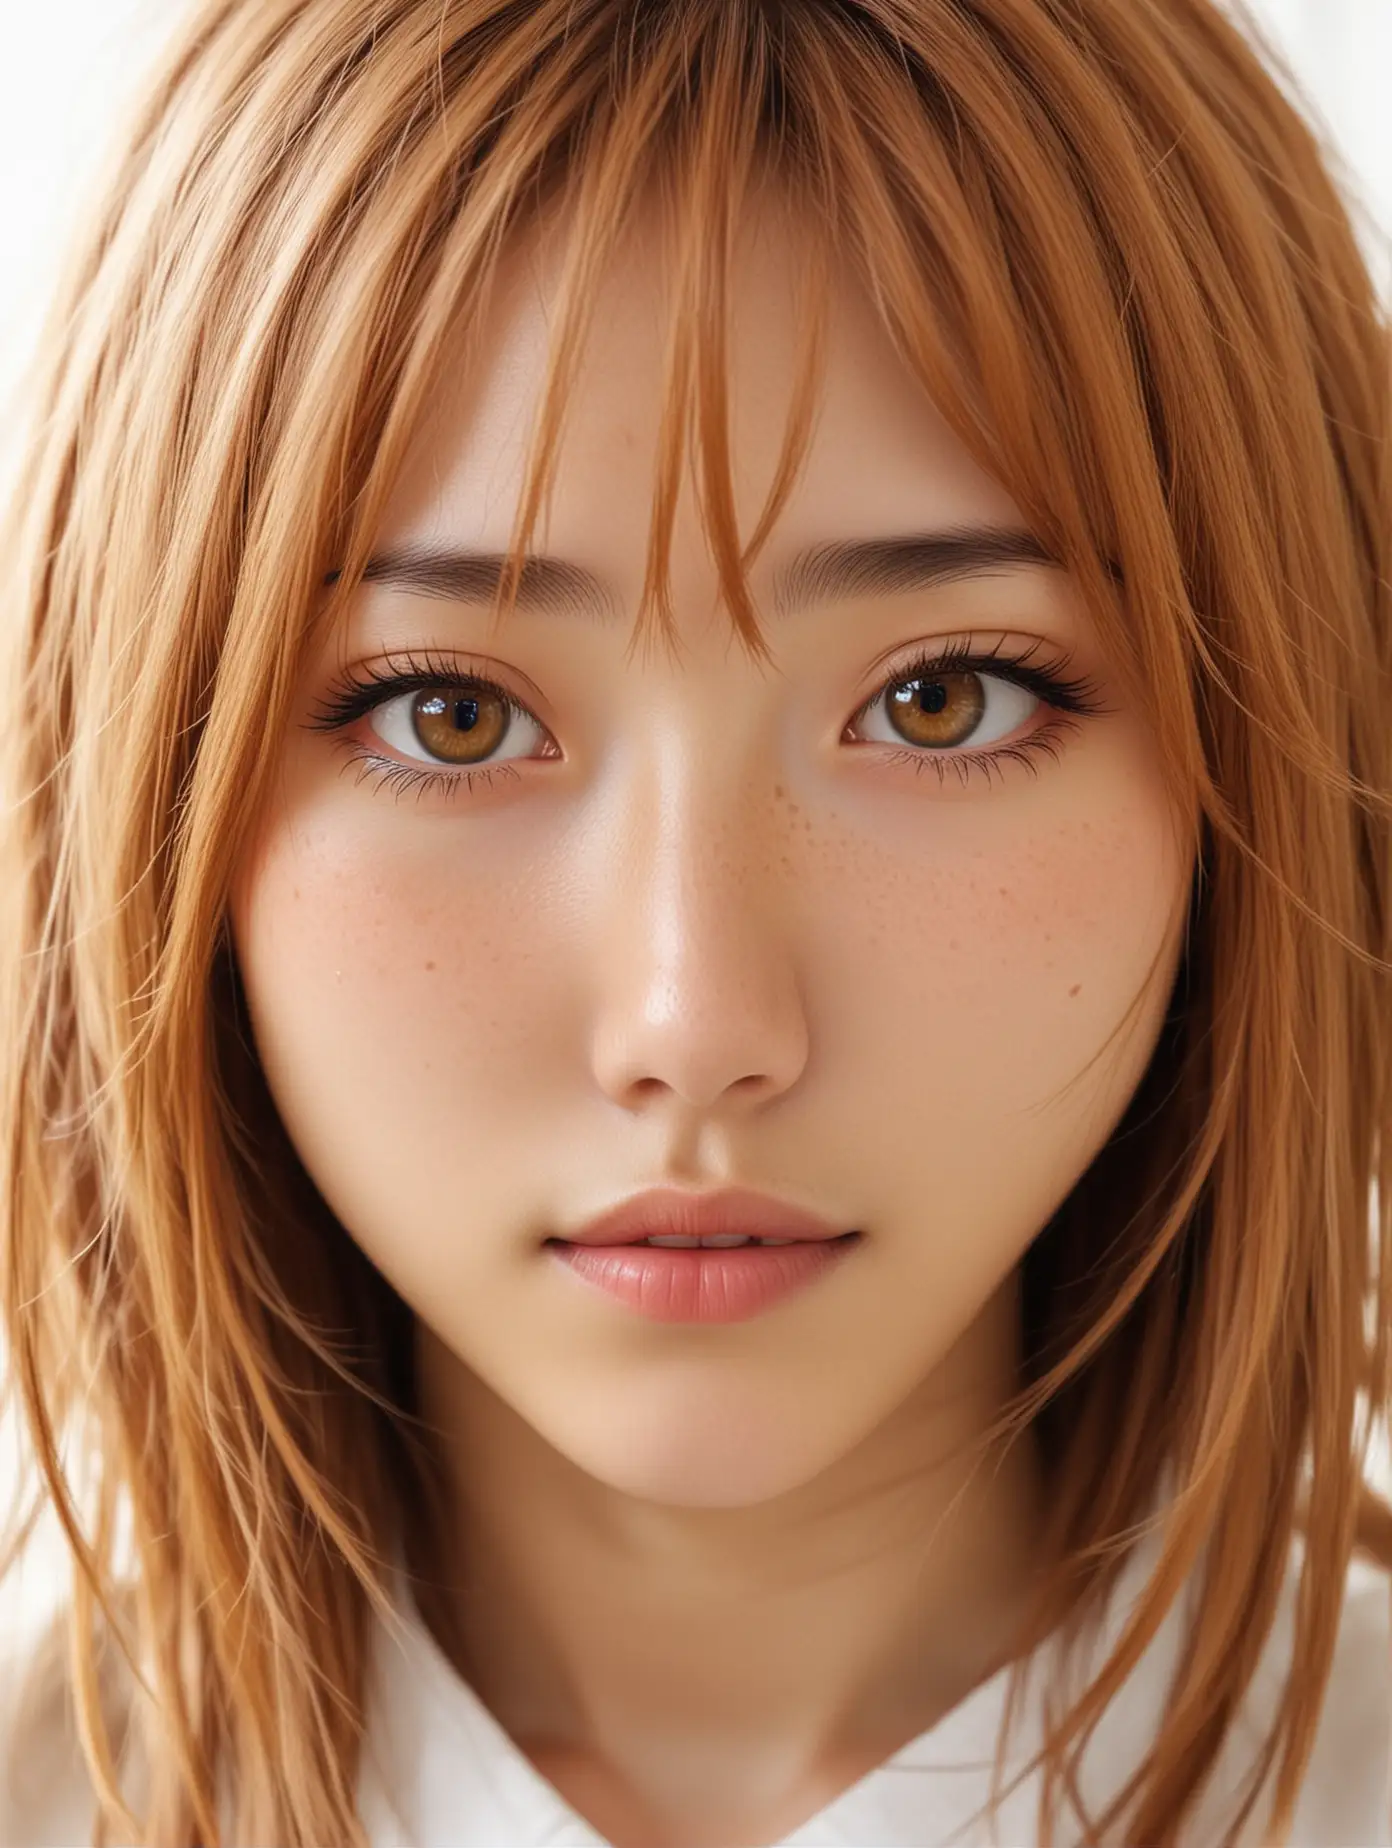 Japanese Girl with Freckles and Amber Eyes Full Body Portrait